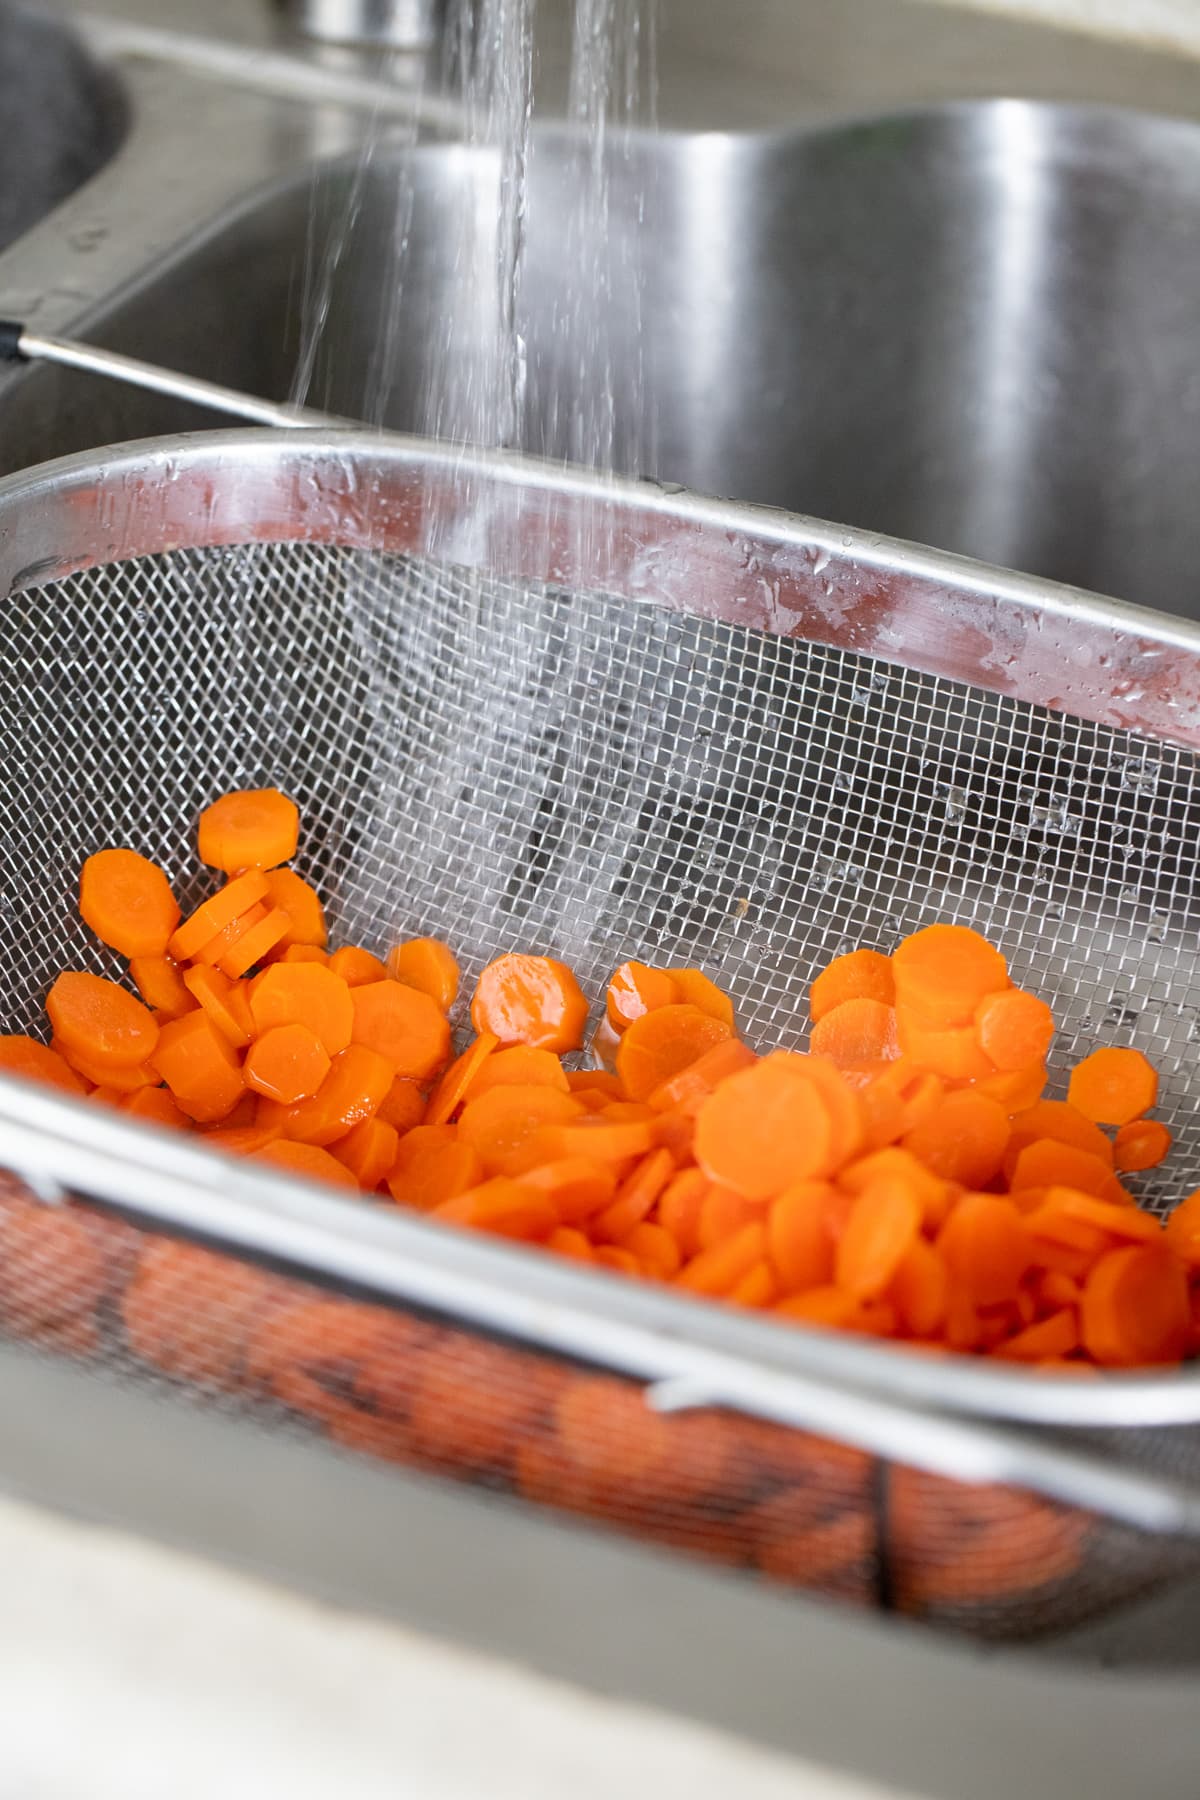 cooling the carrots after blanching